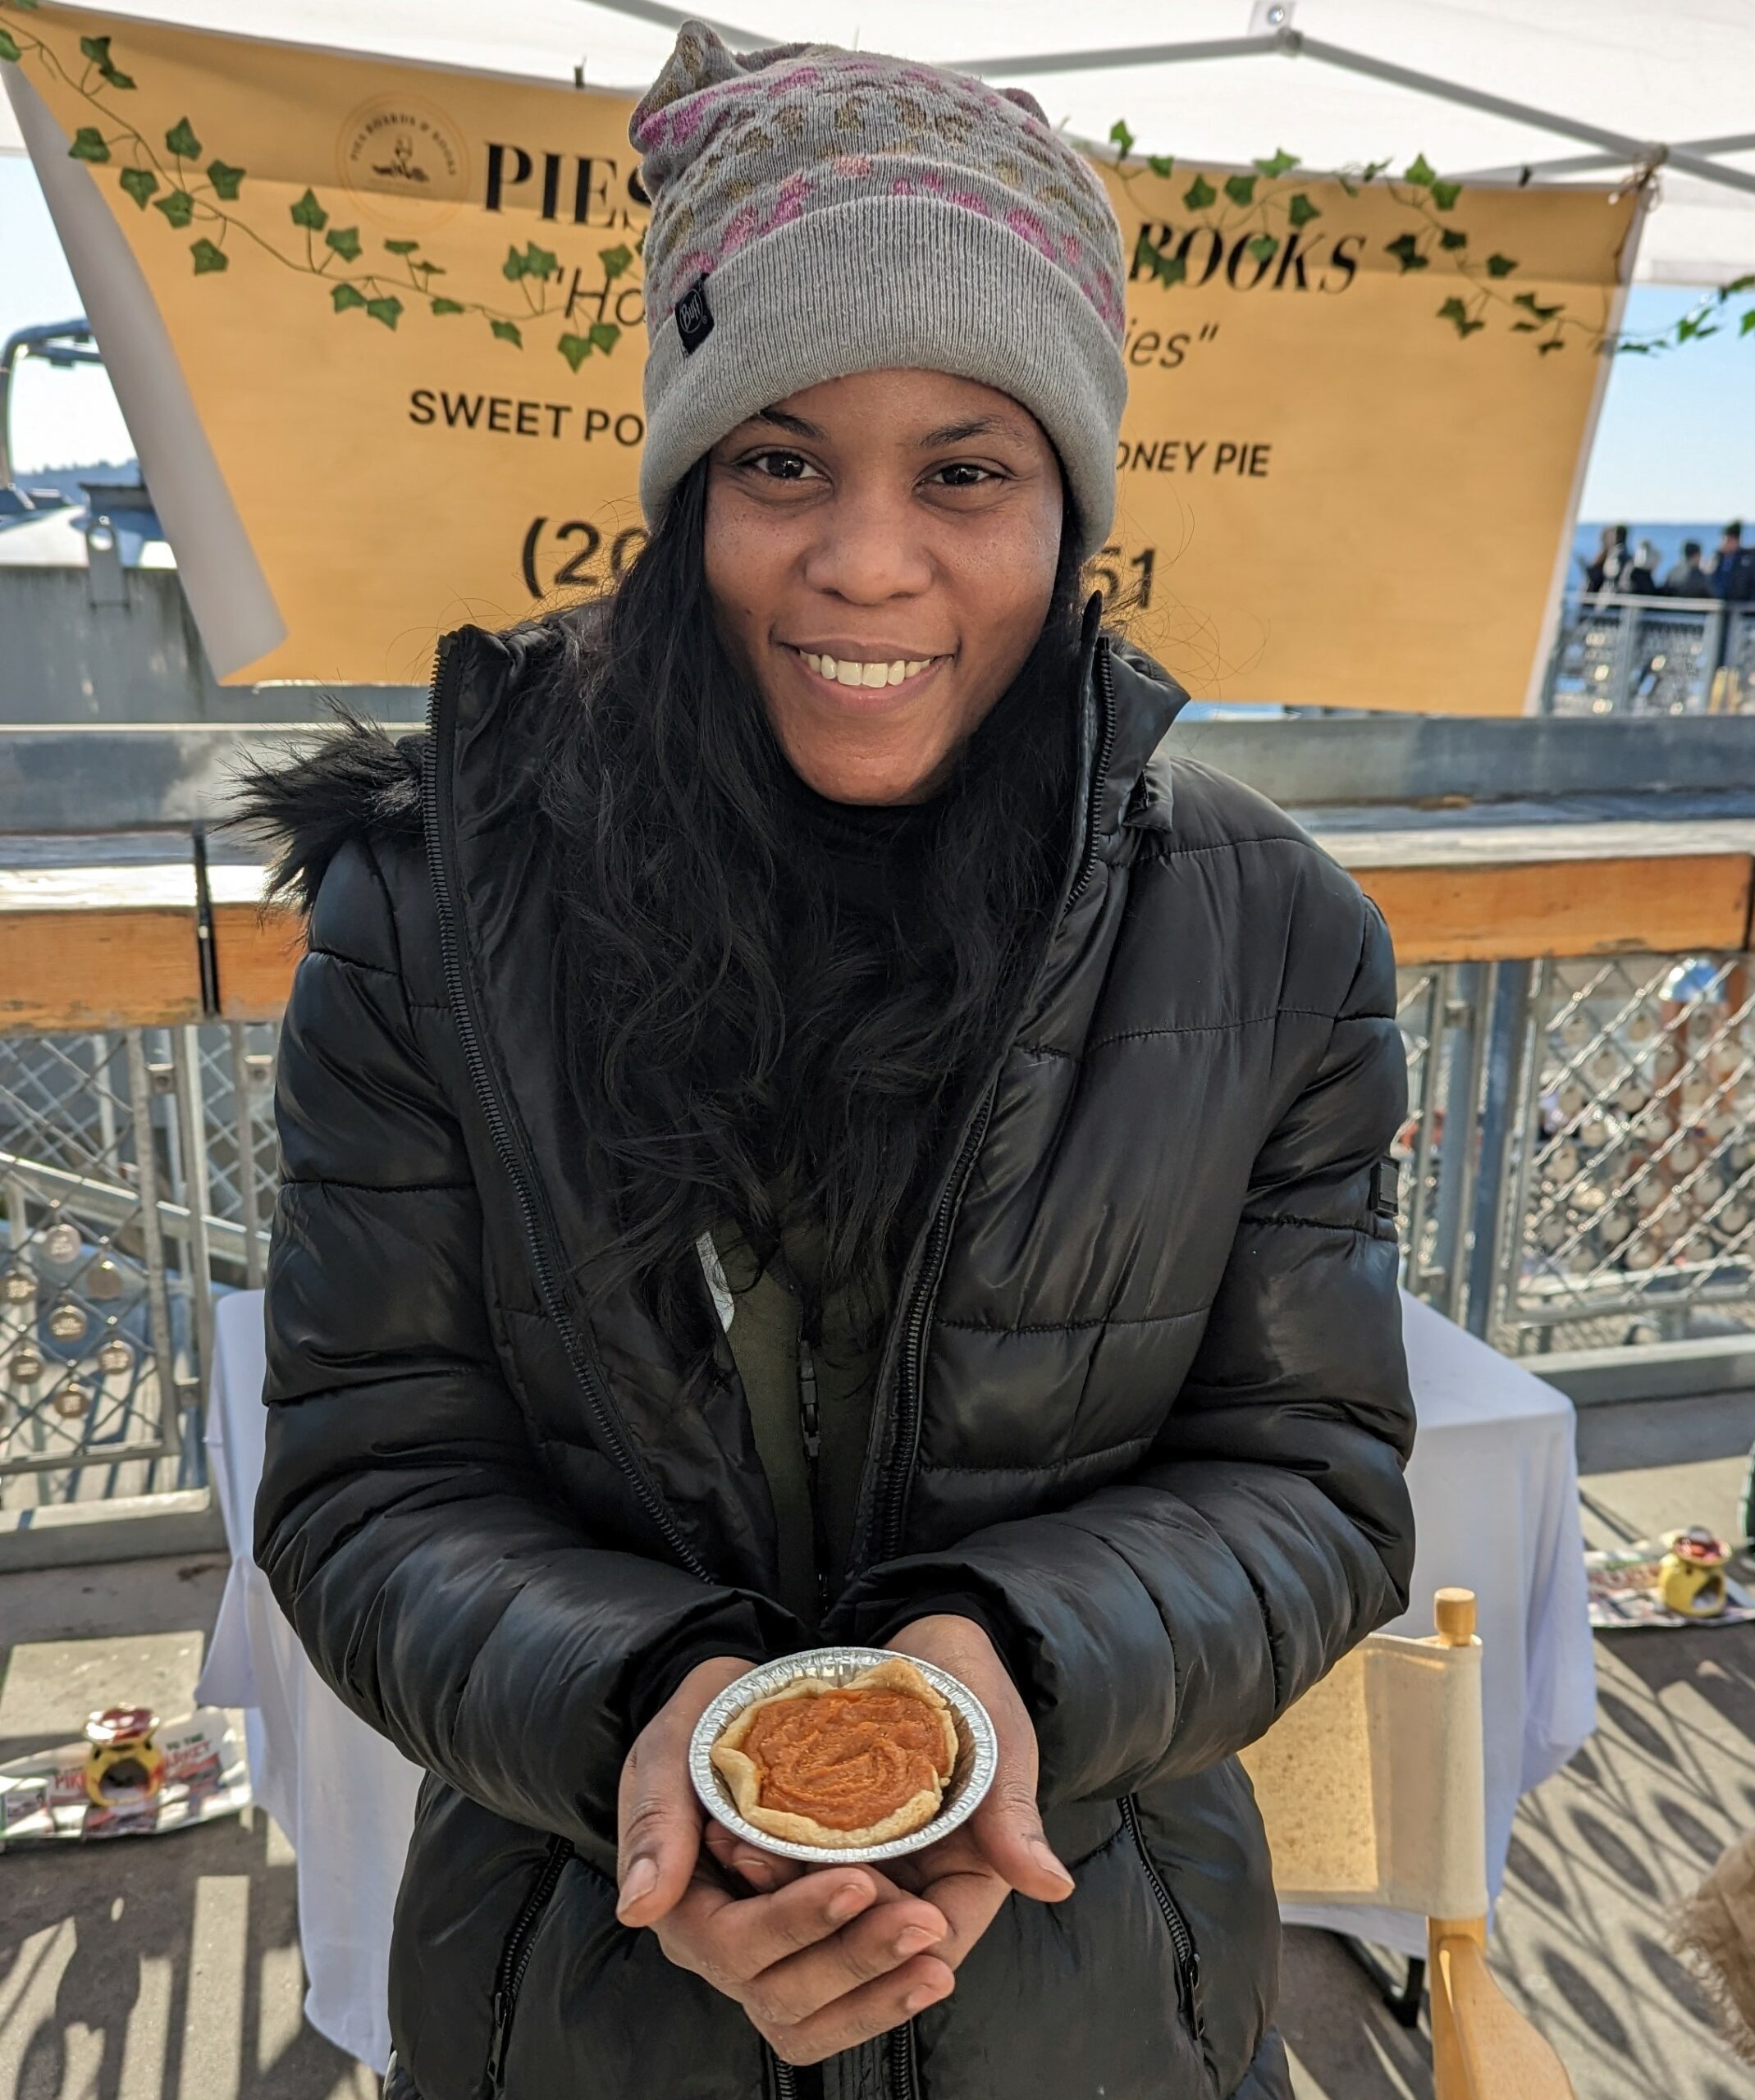 Nadia Moseley holding a personal pie at her stand Pies Boards and Books in Pike Place Market